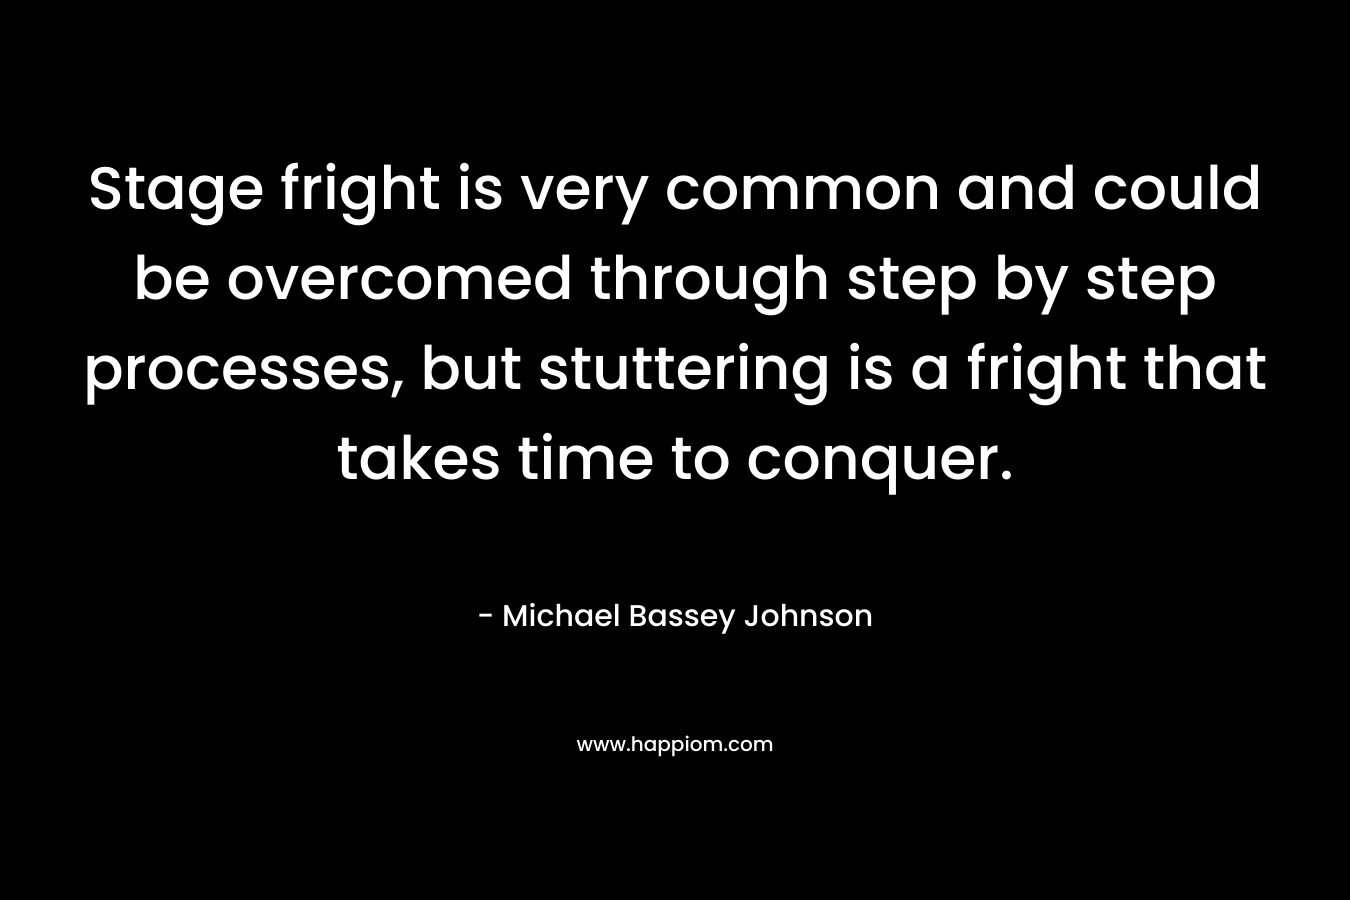 Stage fright is very common and could be overcomed through step by step processes, but stuttering is a fright that takes time to conquer. – Michael Bassey Johnson